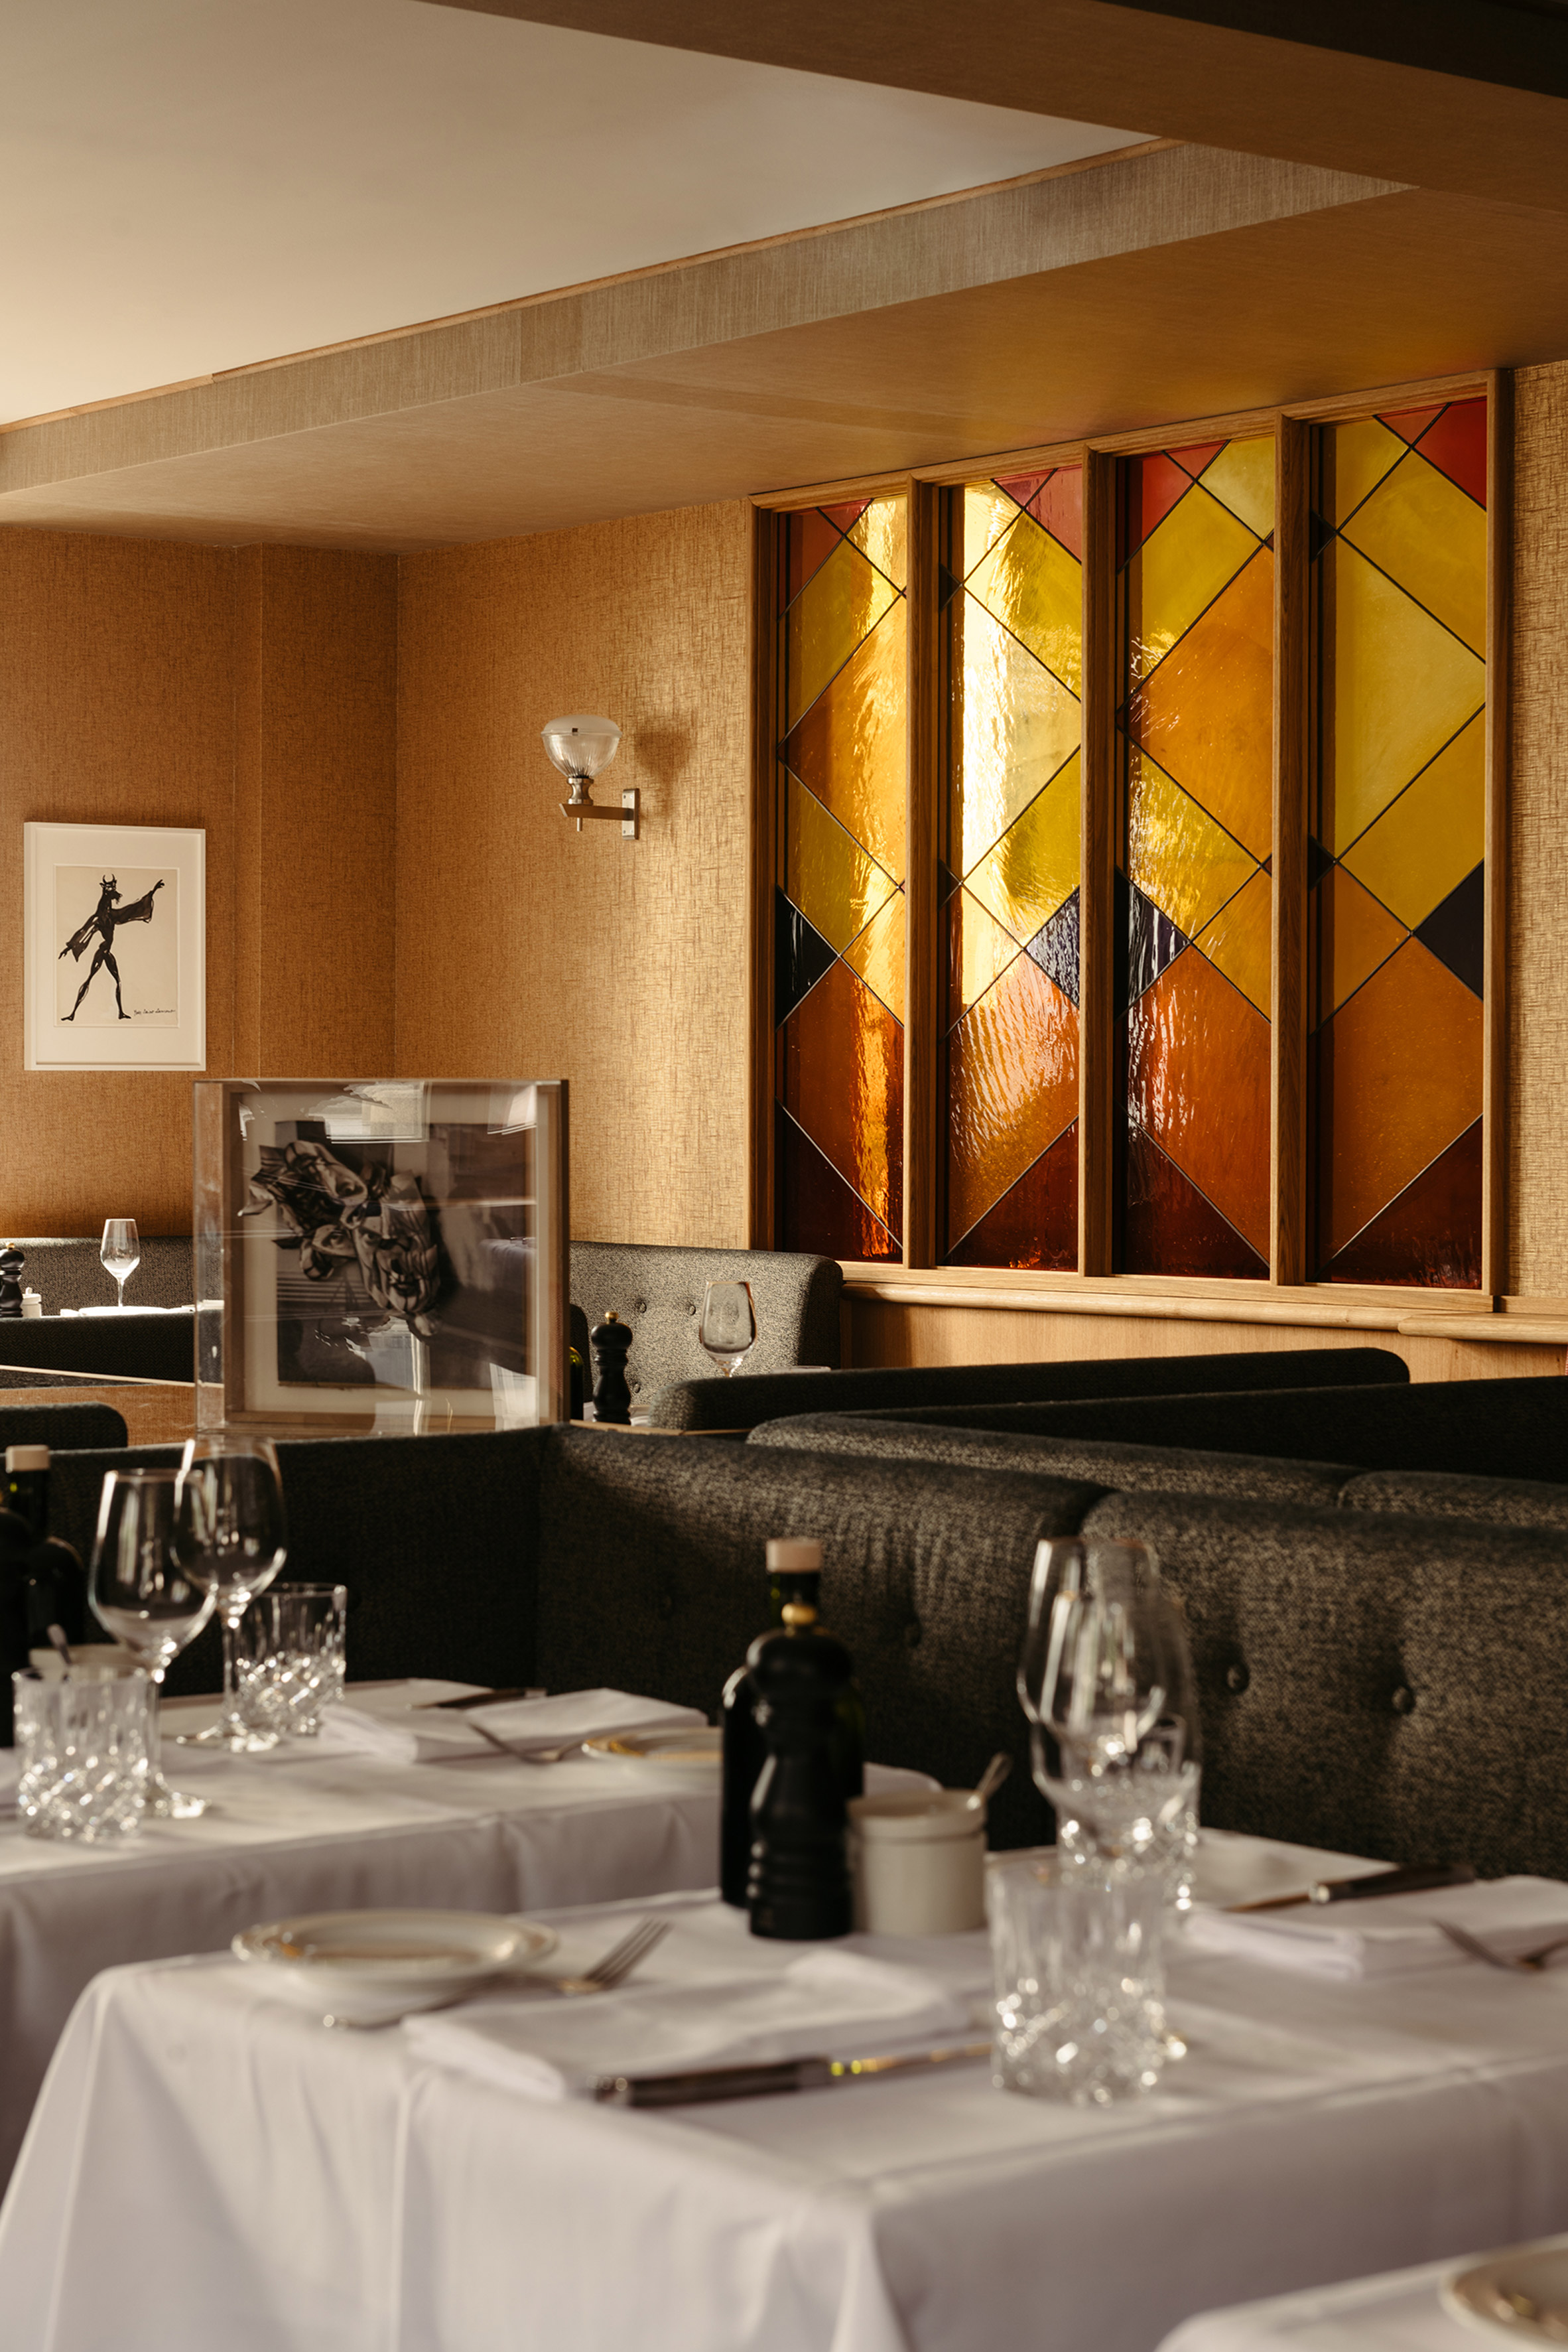 Le Petit Royal Frankfurt restaurant with stained glass window by Paul Hance